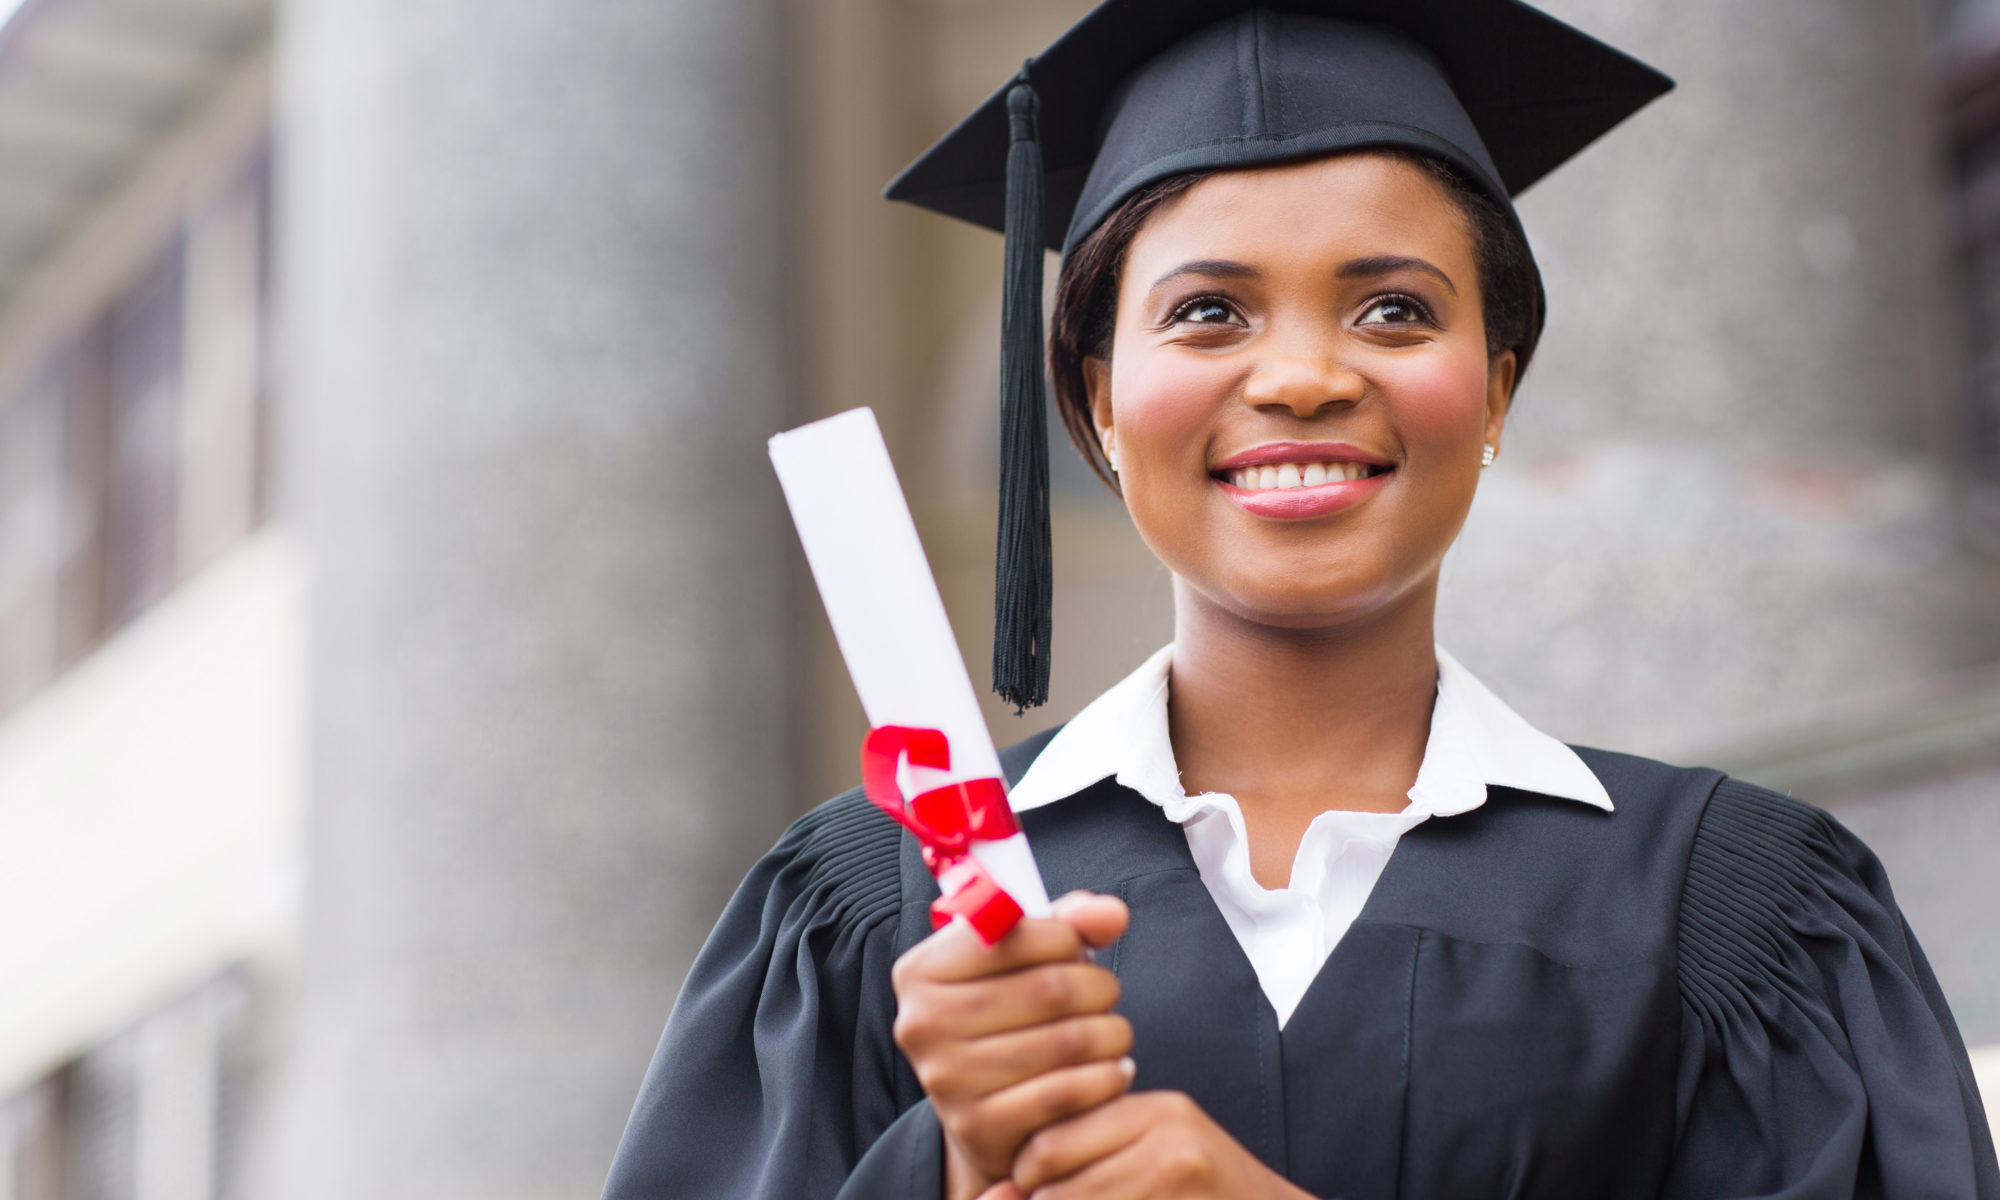 African American woman smiling wearing cap and gown and holding diploma